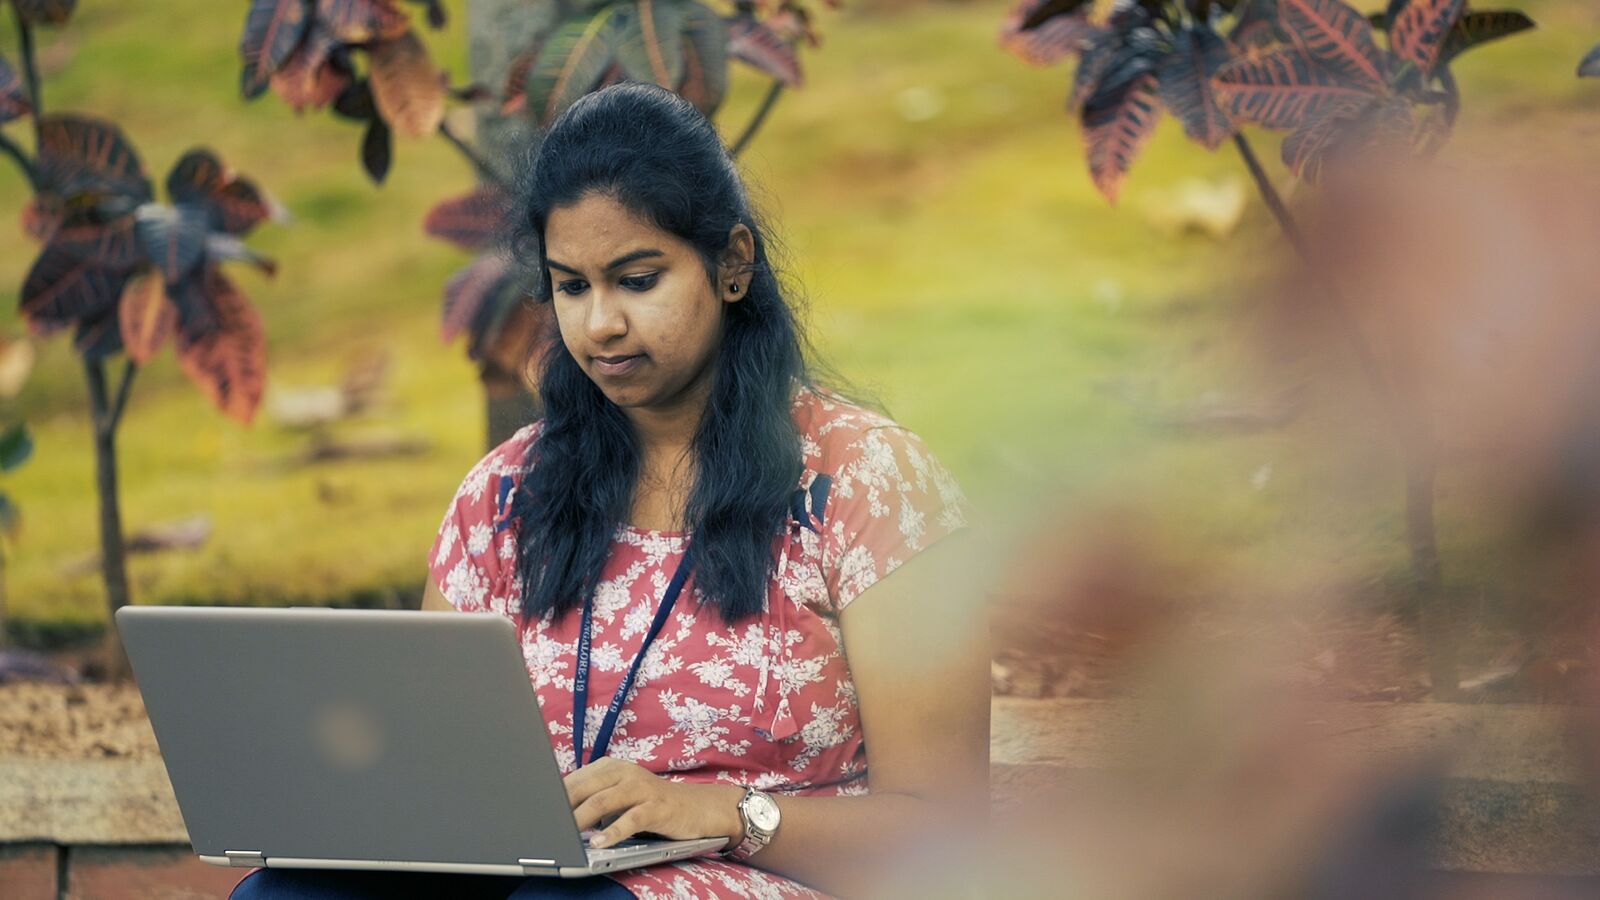 Foundation for Excellence scholarship recipient Supreeta works on her laptop outside.